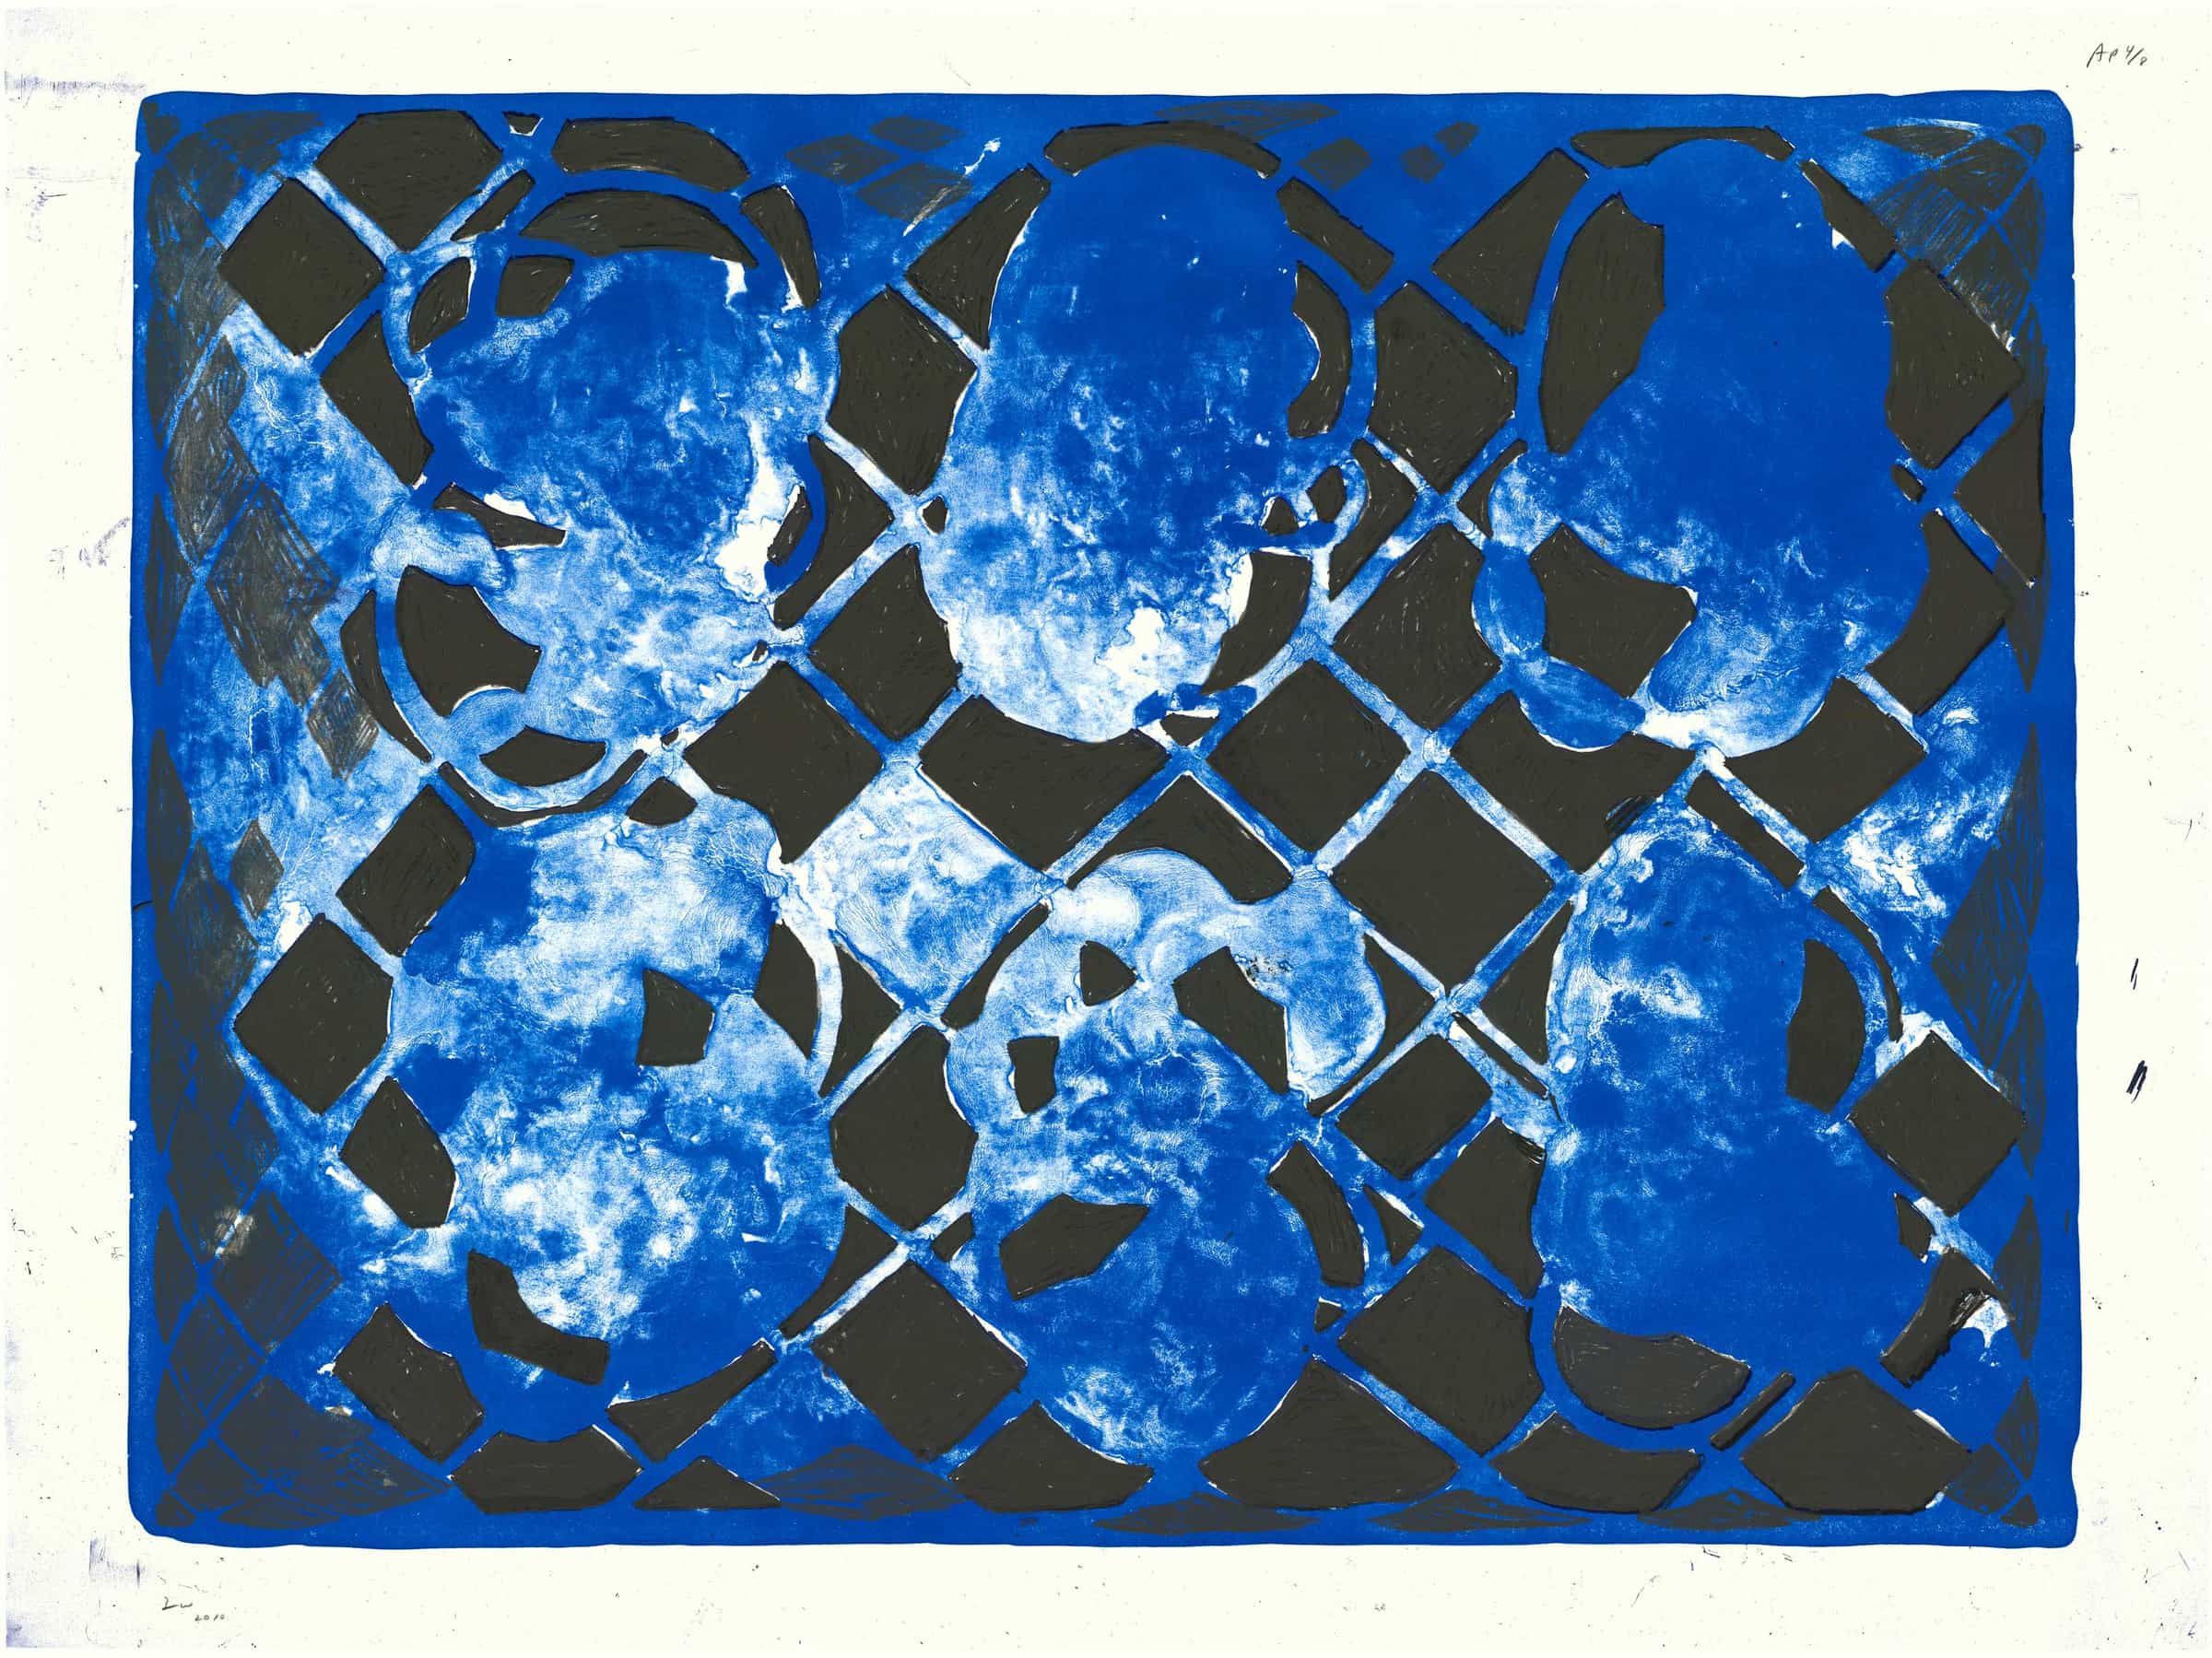 Terry Winters, Blue Stone, 2010